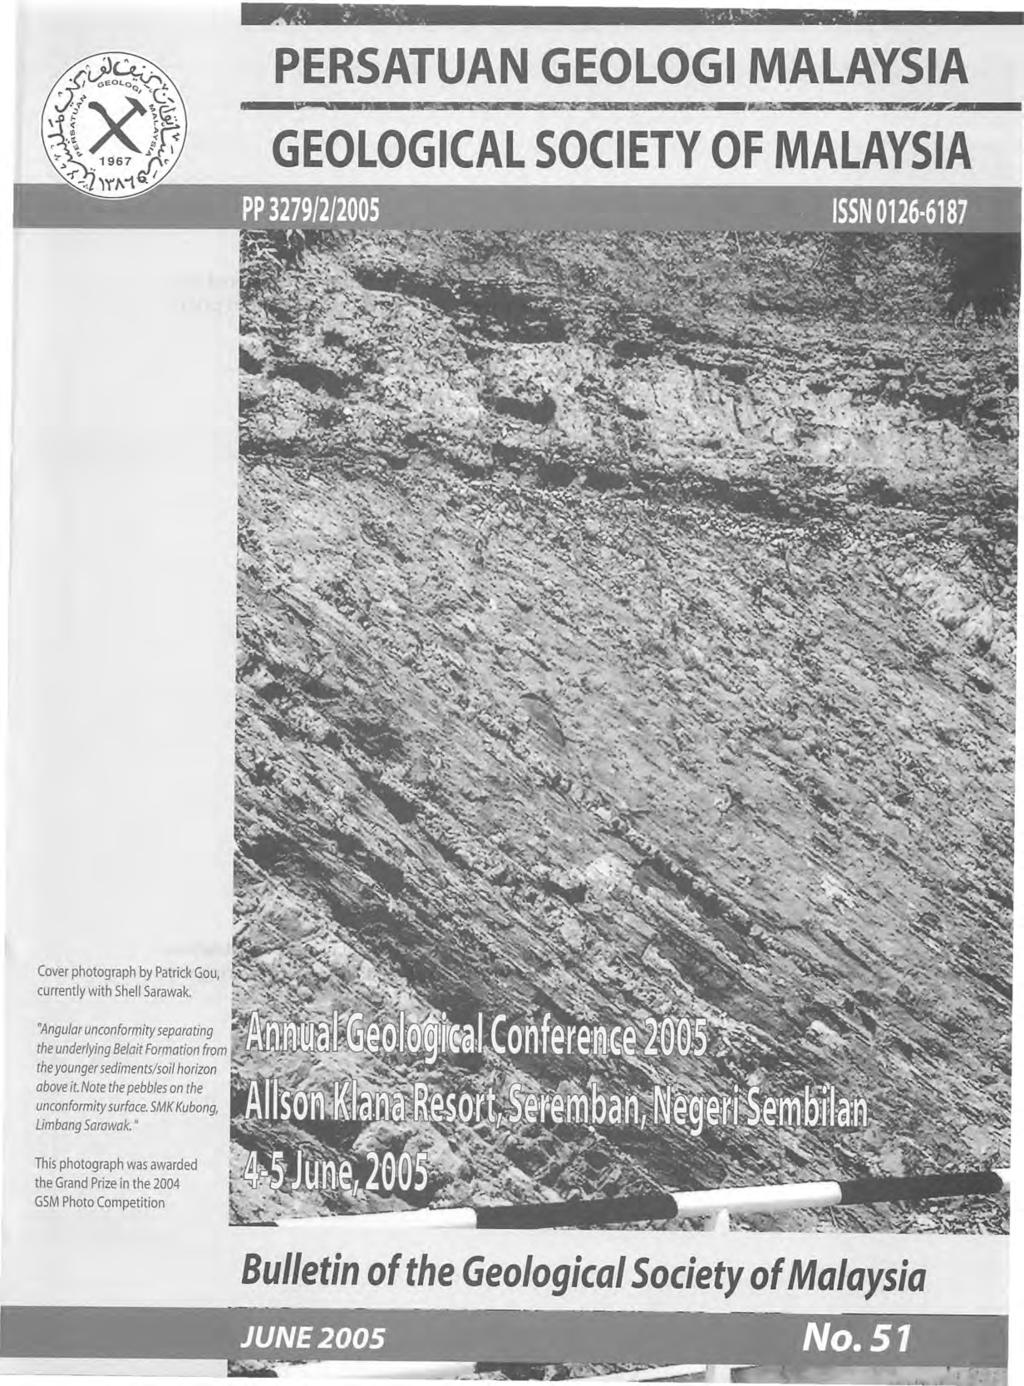 GEOLOGICAL SOCIETY OF MALAYSIA Cover photograph by Patrick Gou, currently with Shell Sarawak.